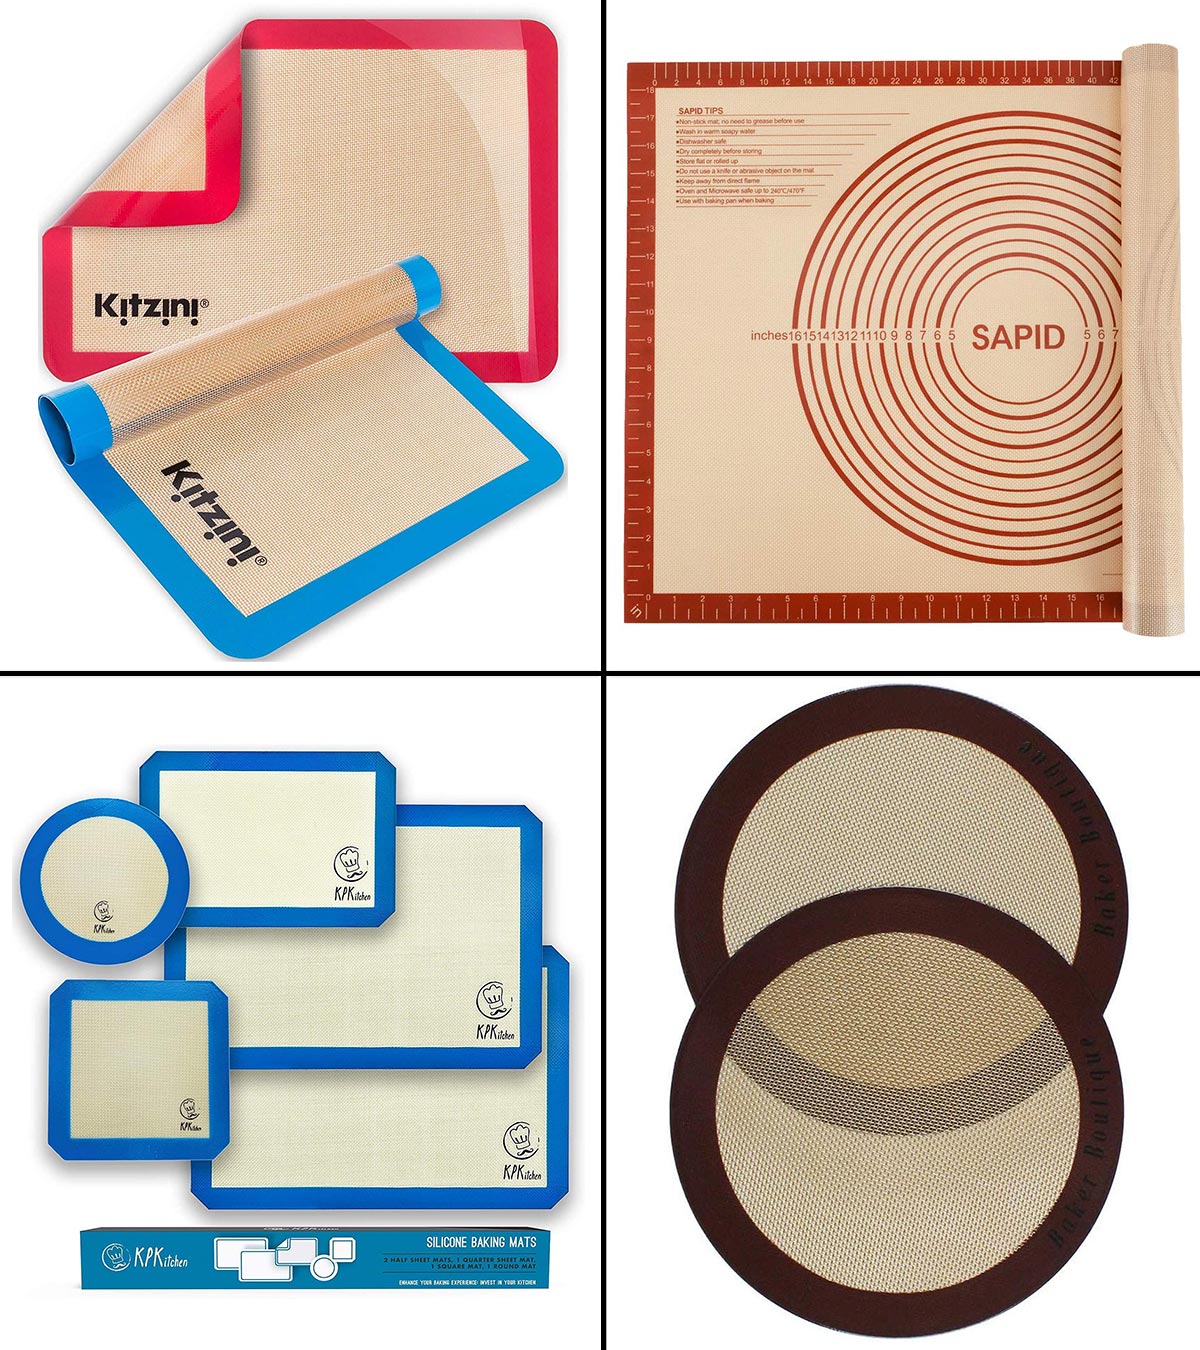 Non-Slip Pastry Mat Set Combo Kit of Silicone Mat with Measurements and Non-Stick Surface Plastic Bowl Scraper and Cookie Cutters for Baking